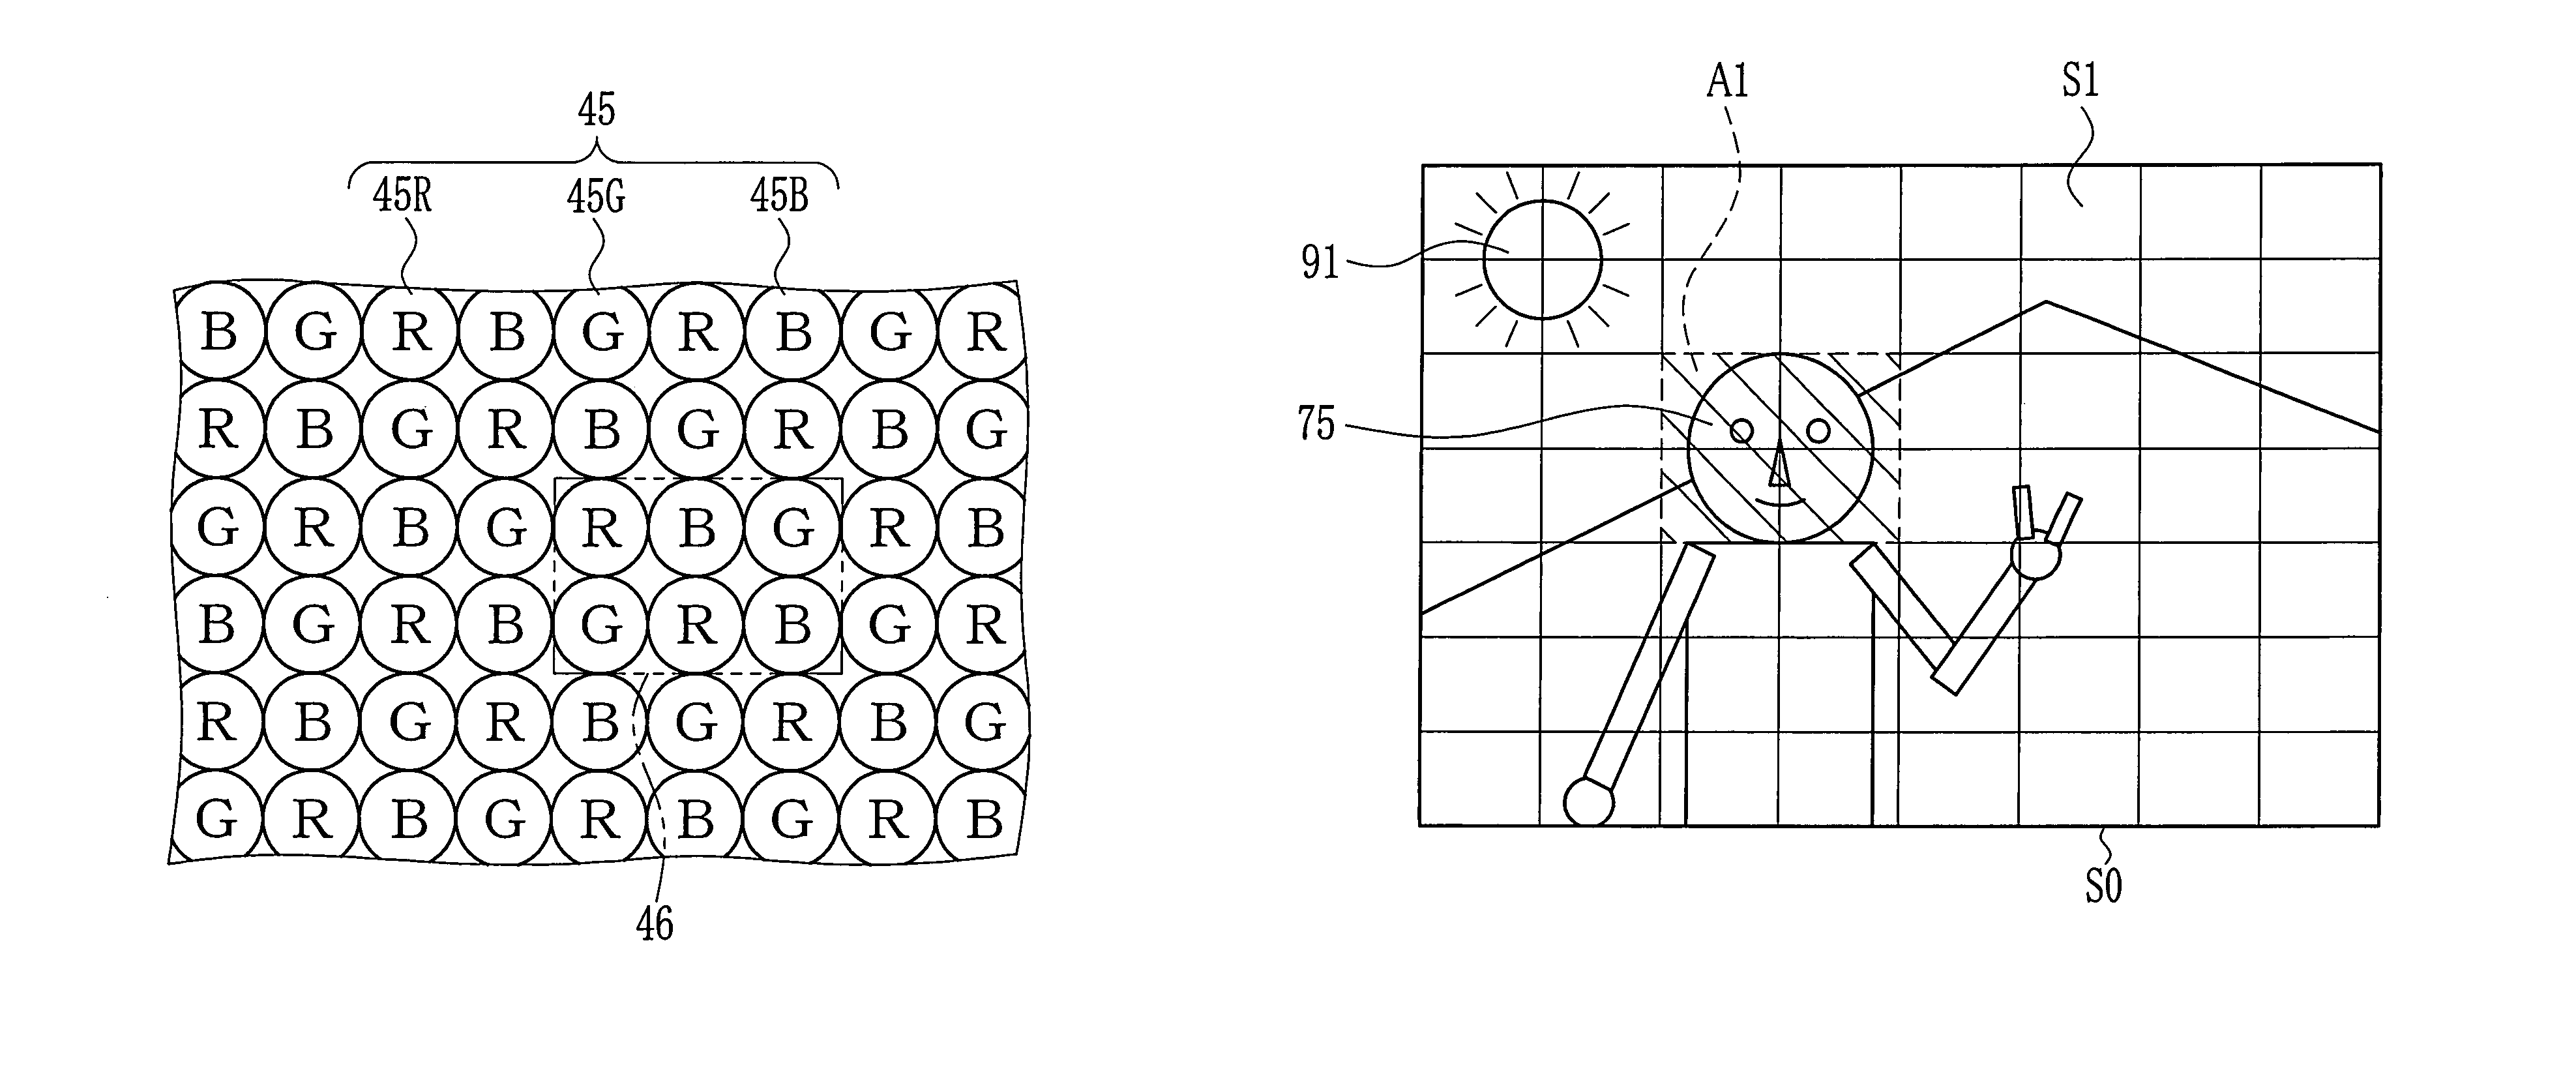 Image capturing apparatus with flash device having an LED array